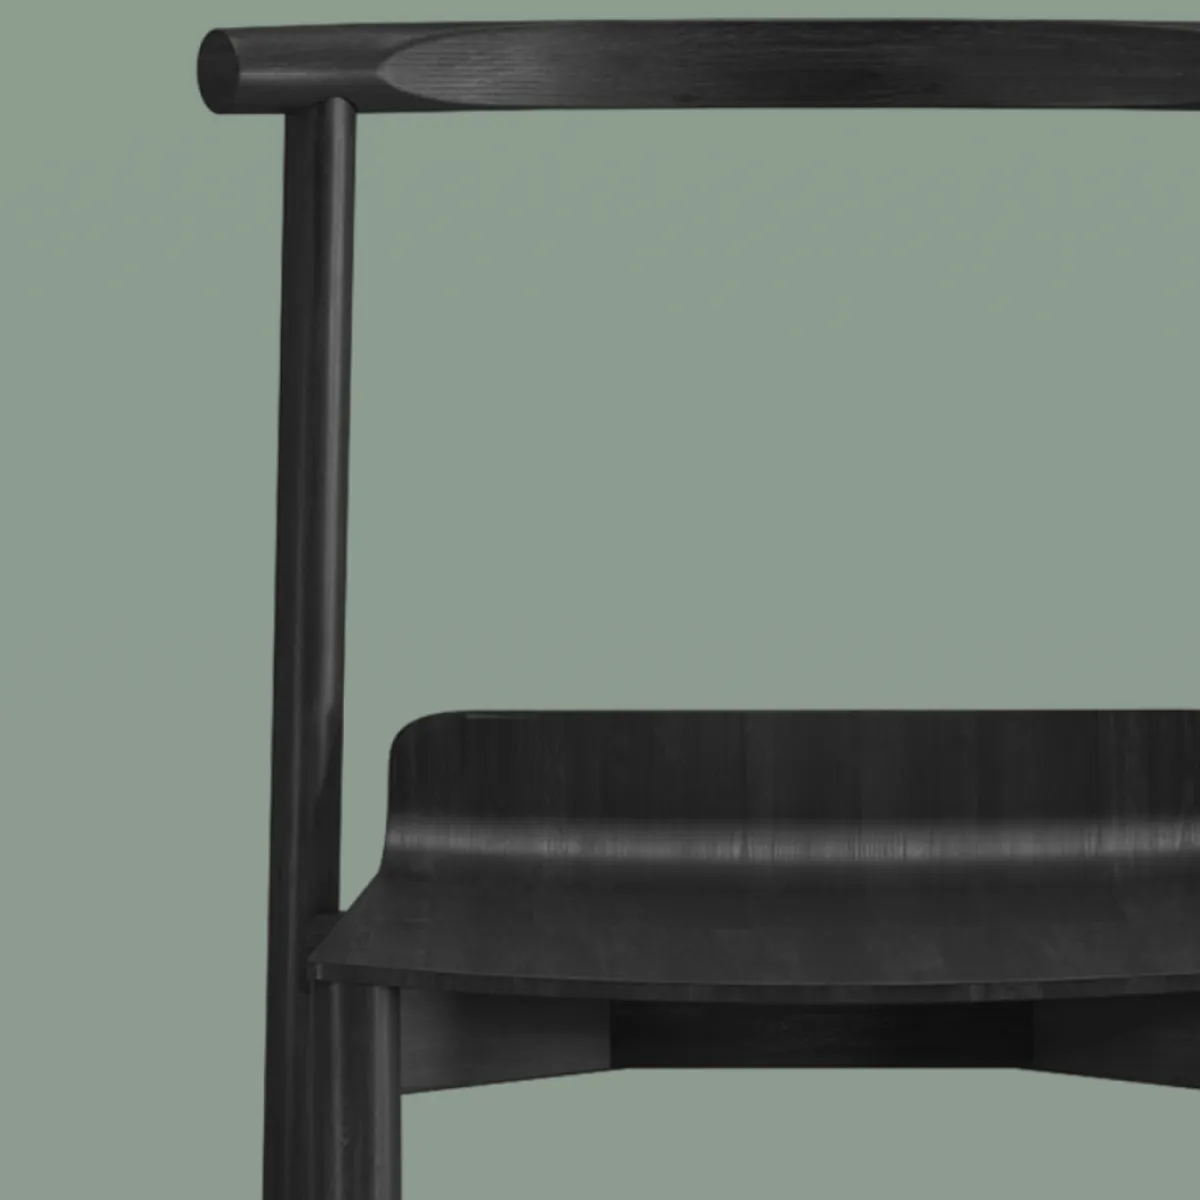 Wox side chair 5